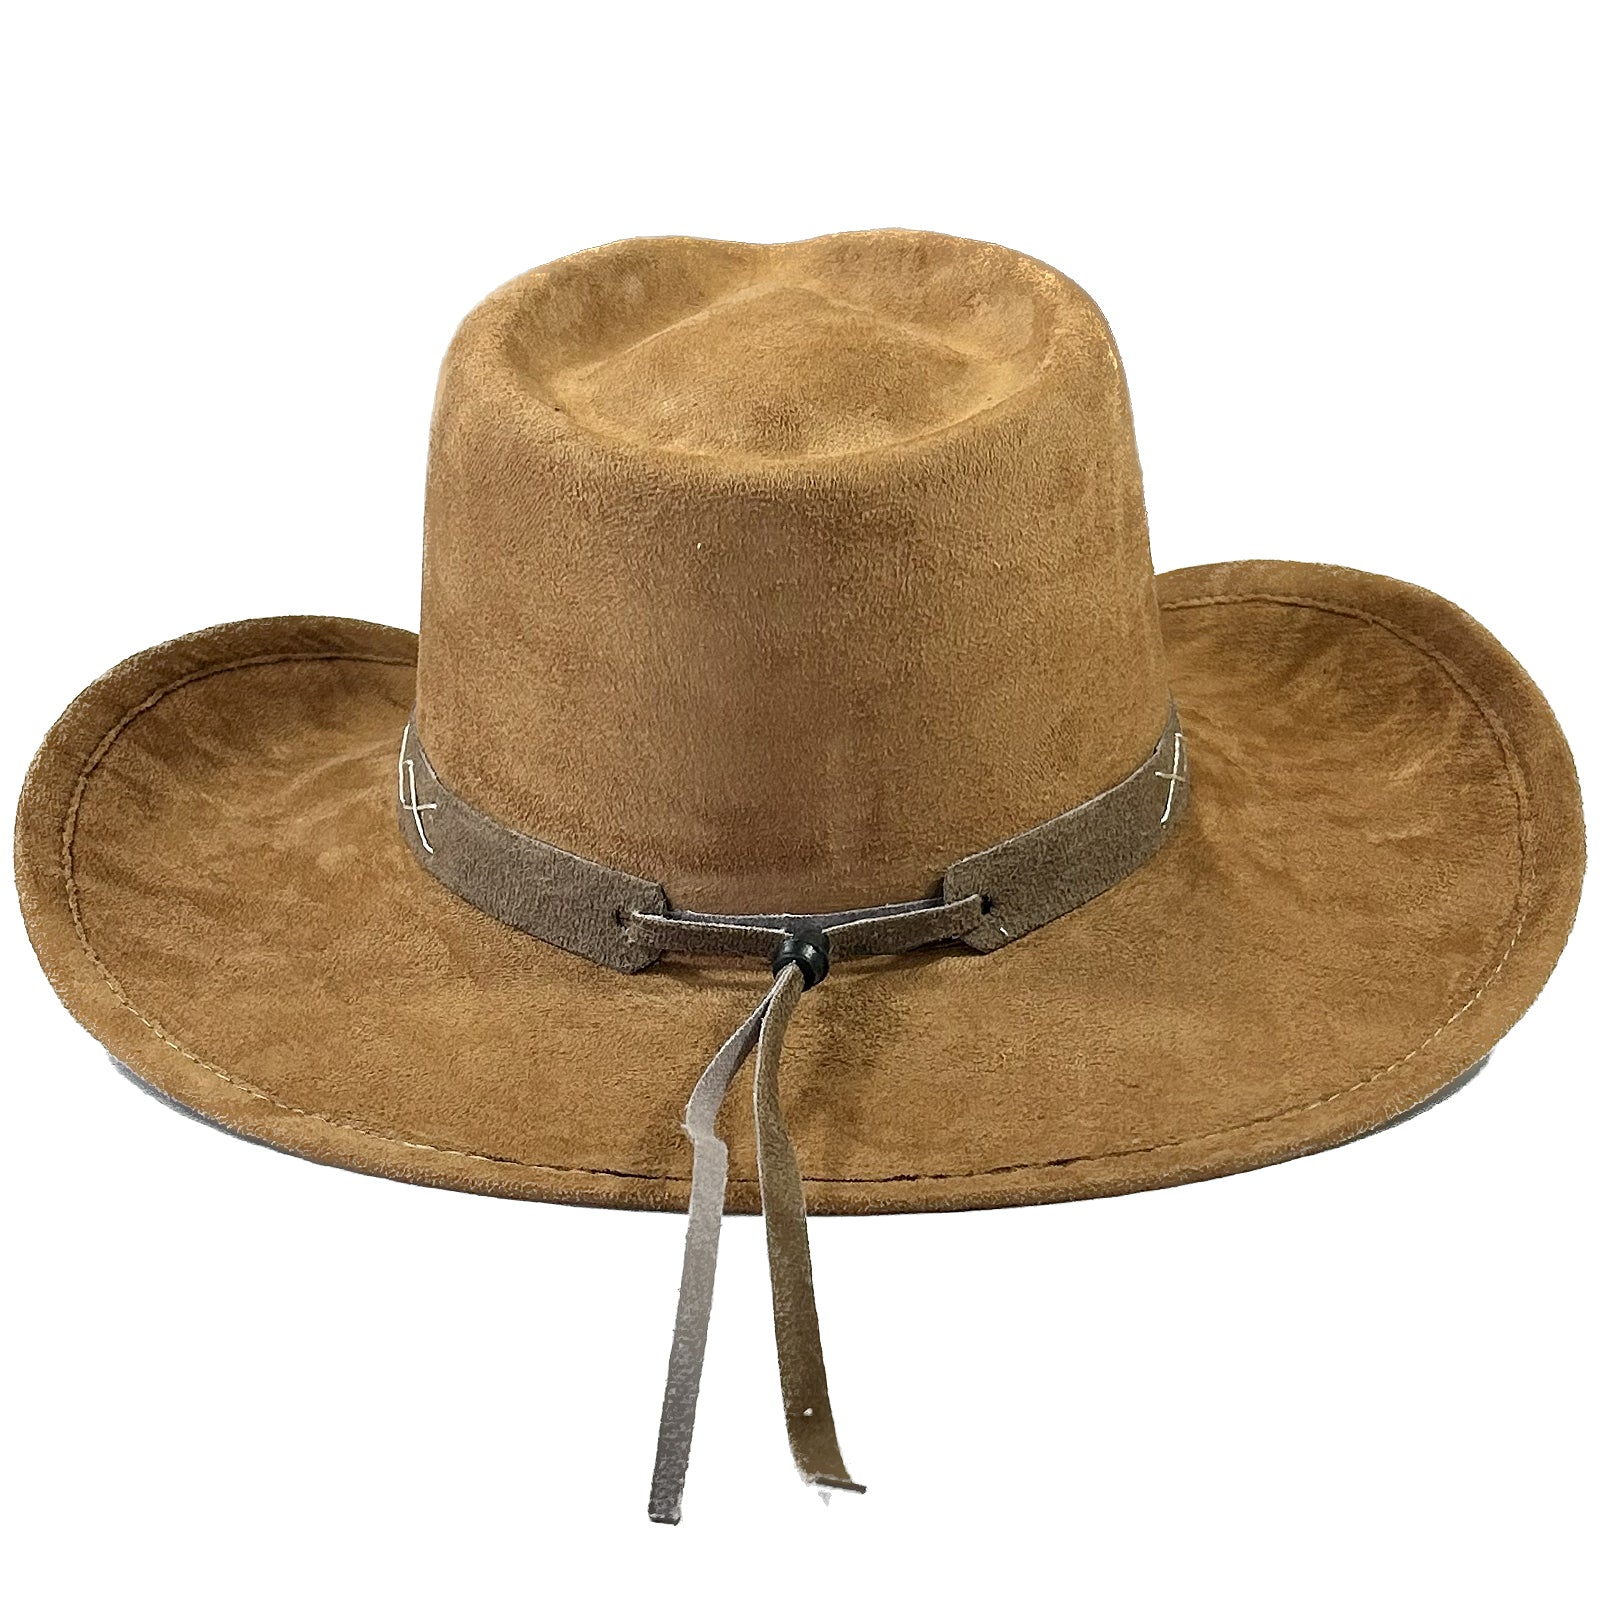 Suede Canyon Western Cowboy Hat in Light Brown